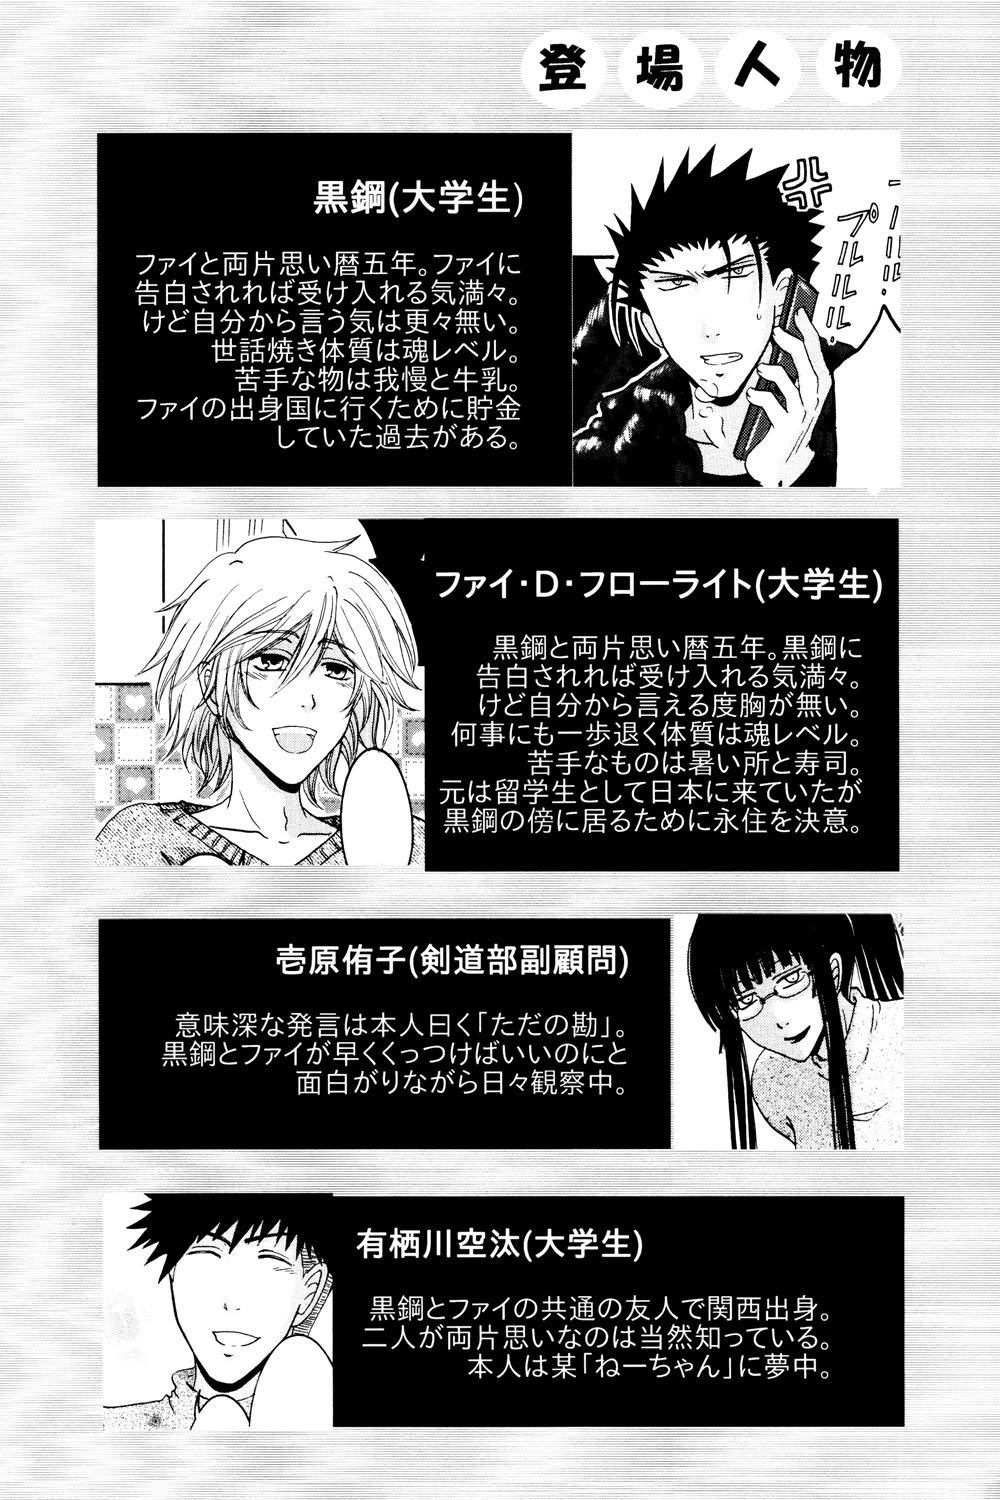 Massage Creep New Year wa Kimi no Bed de. - Tsubasa reservoir chronicle From - Picture 3